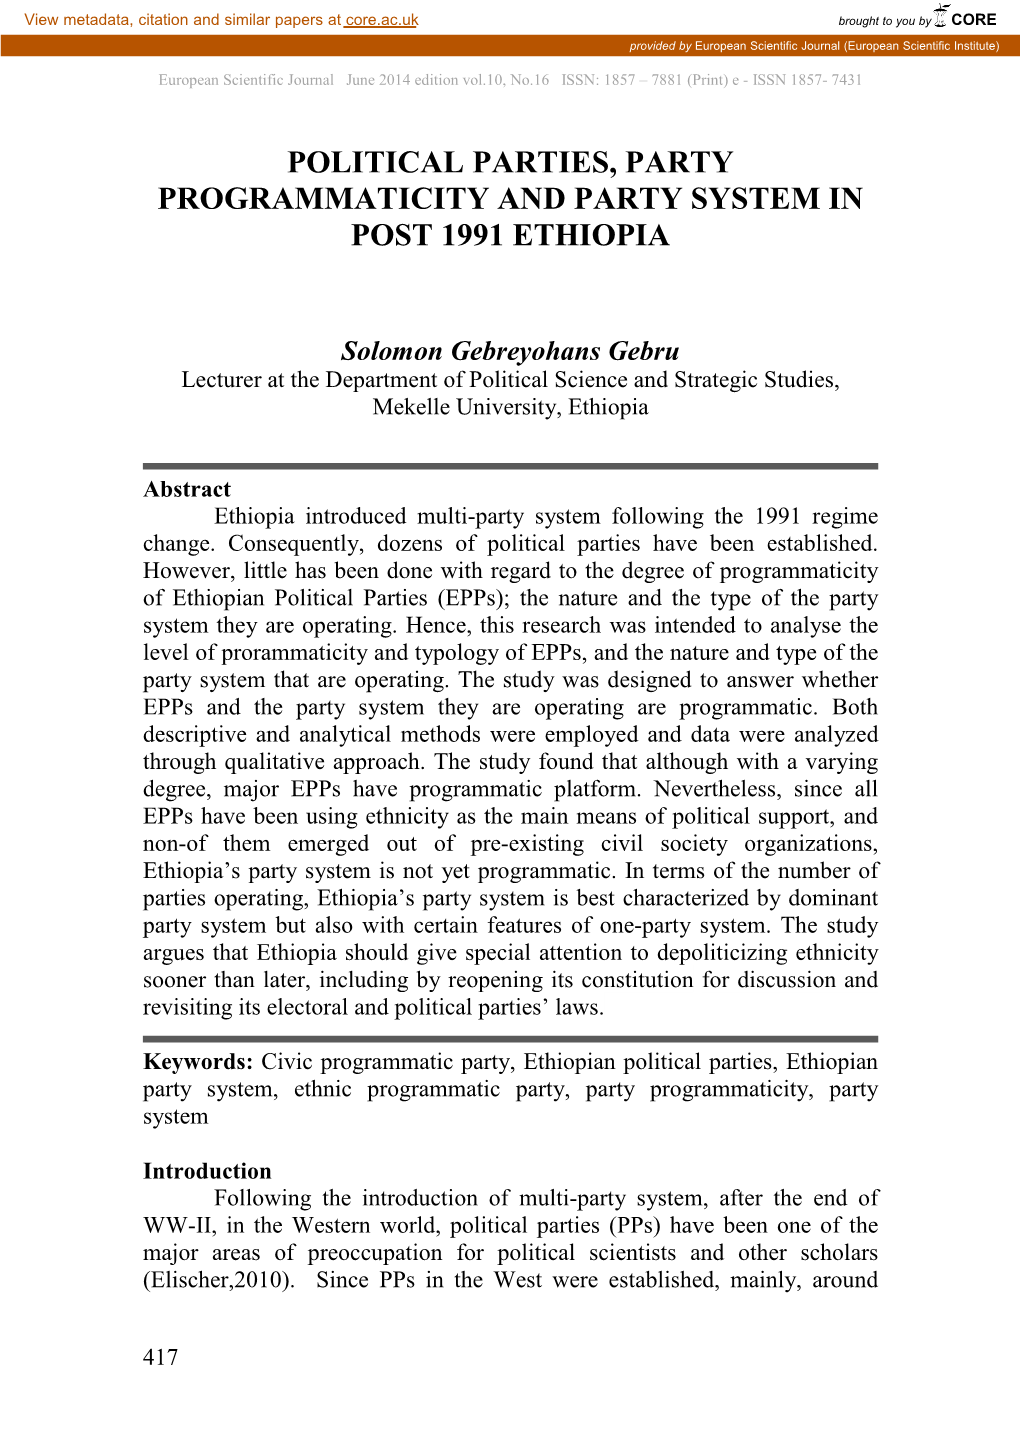 Political Parties, Party Programmaticity and Party System in Post 1991 Ethiopia